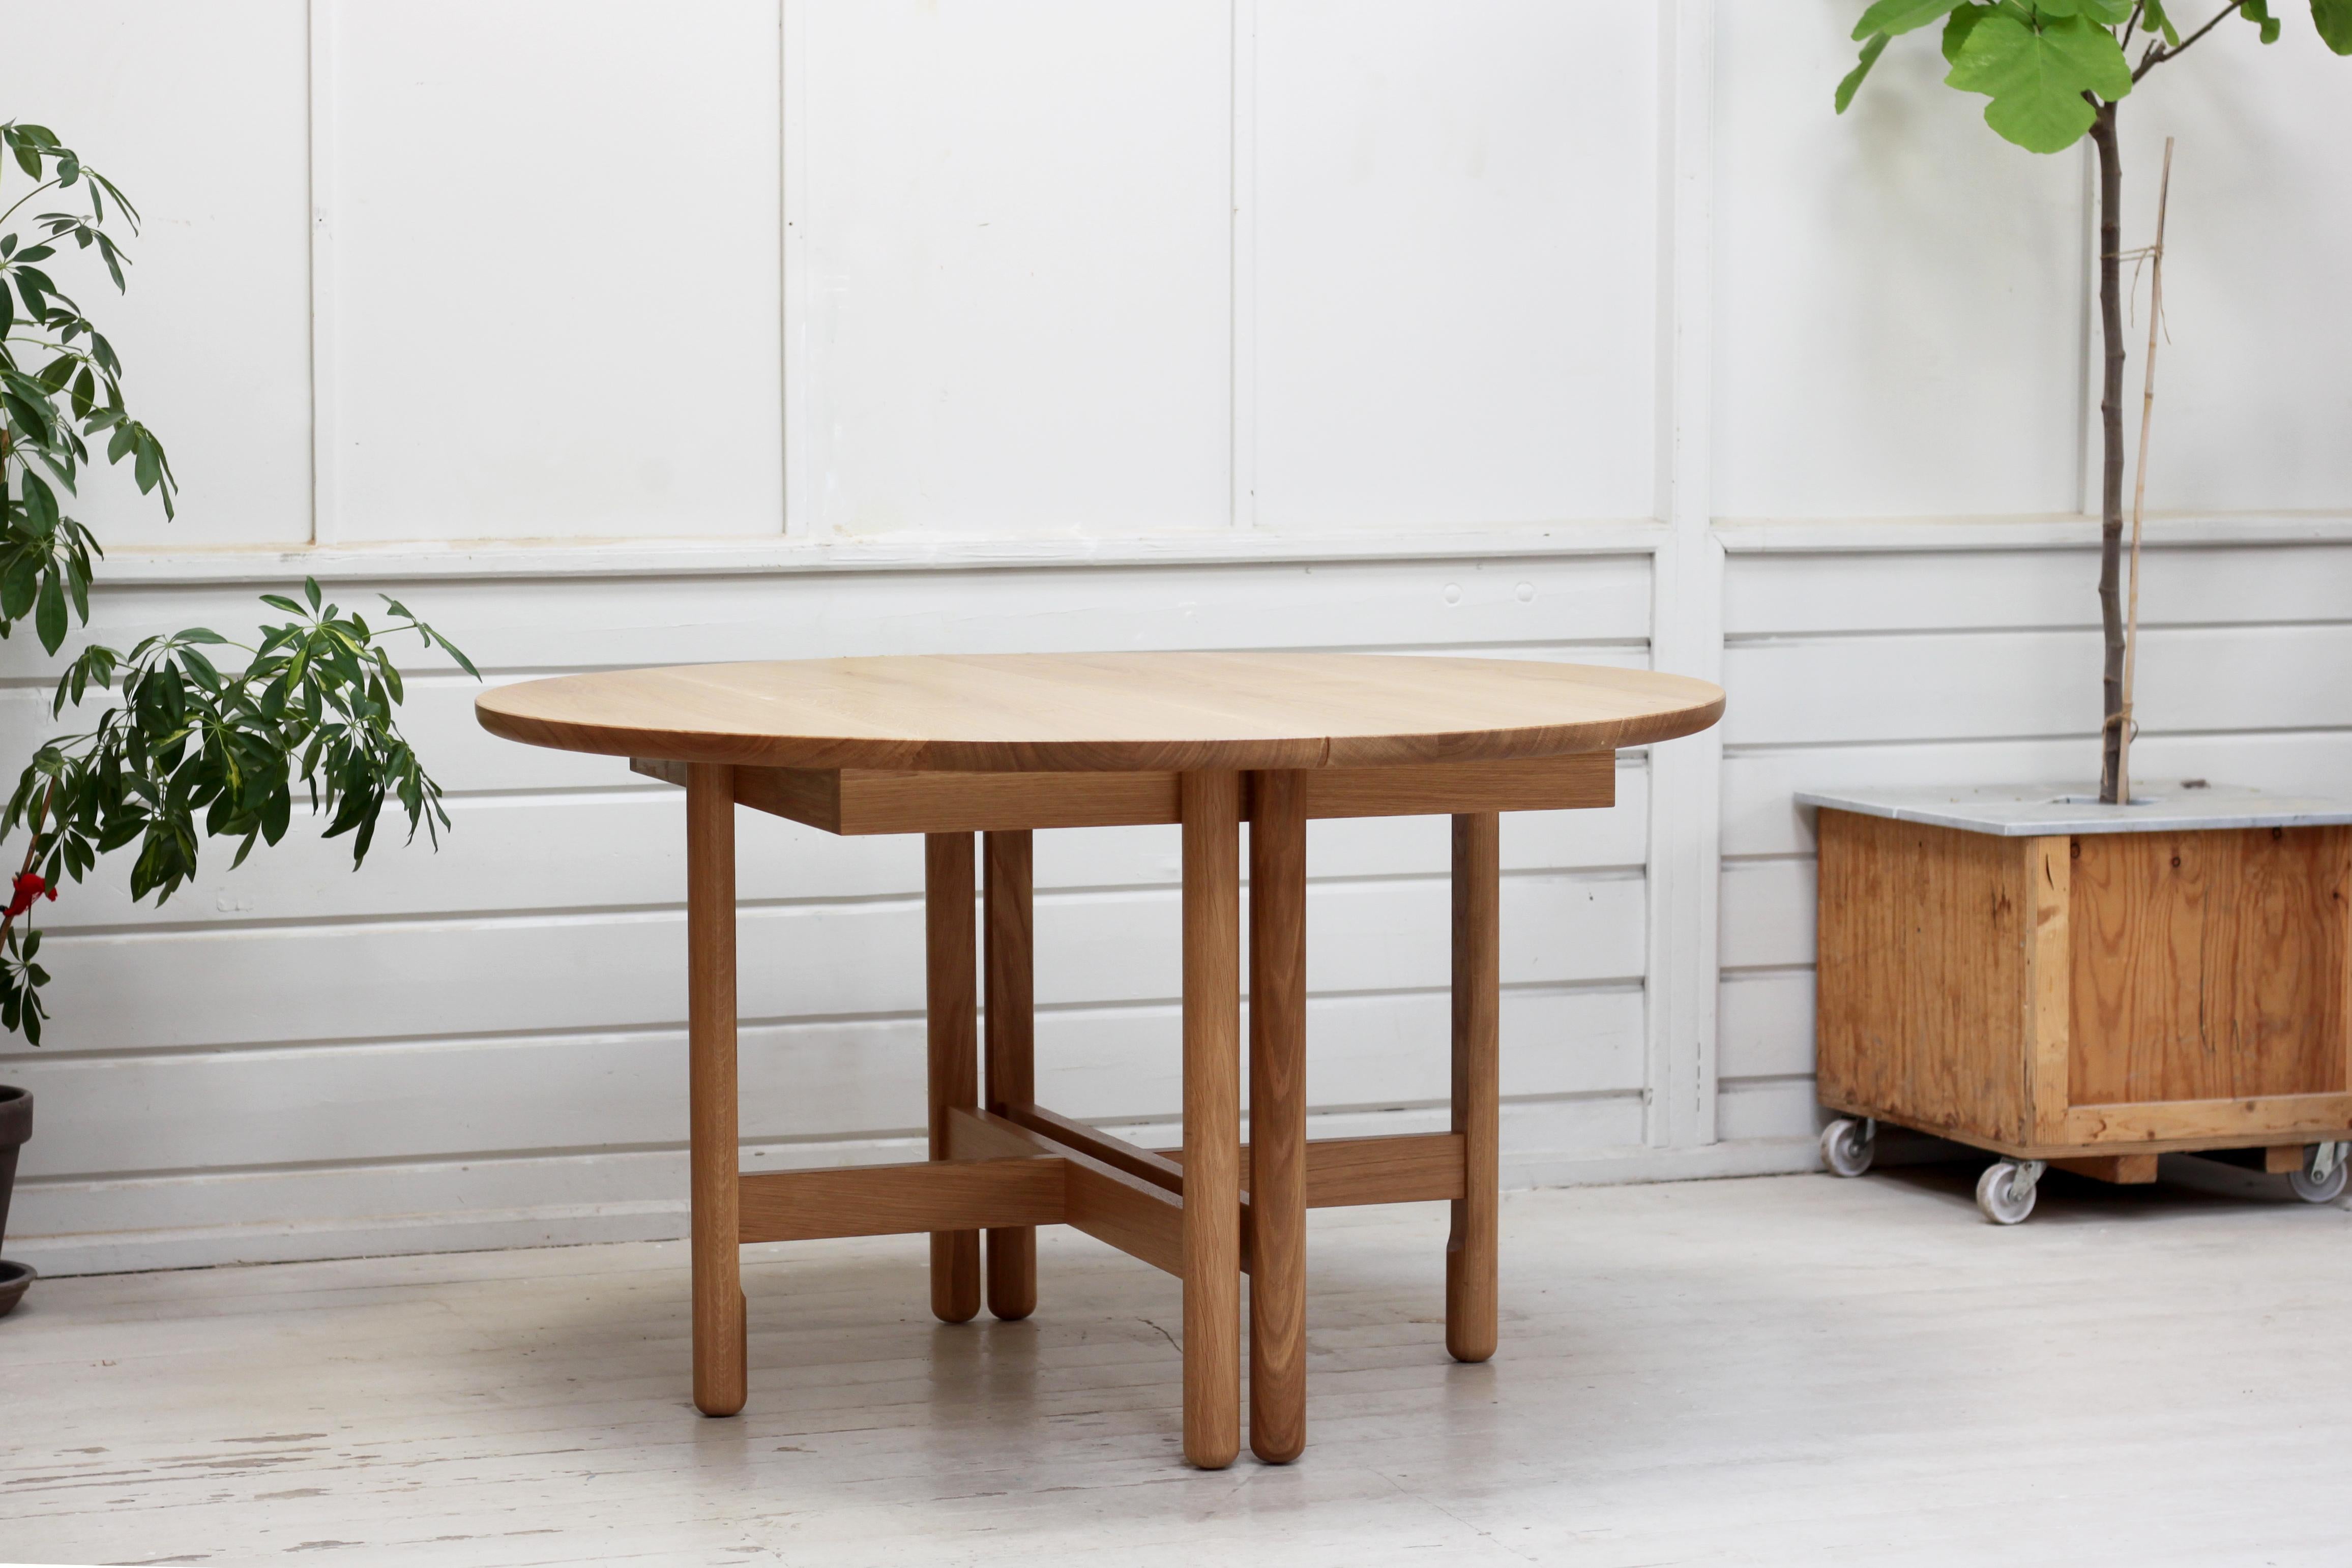 Handmade Thea Dining Table, Extendable Ø130cm - Painted Oak - by BACD studio For Sale 1